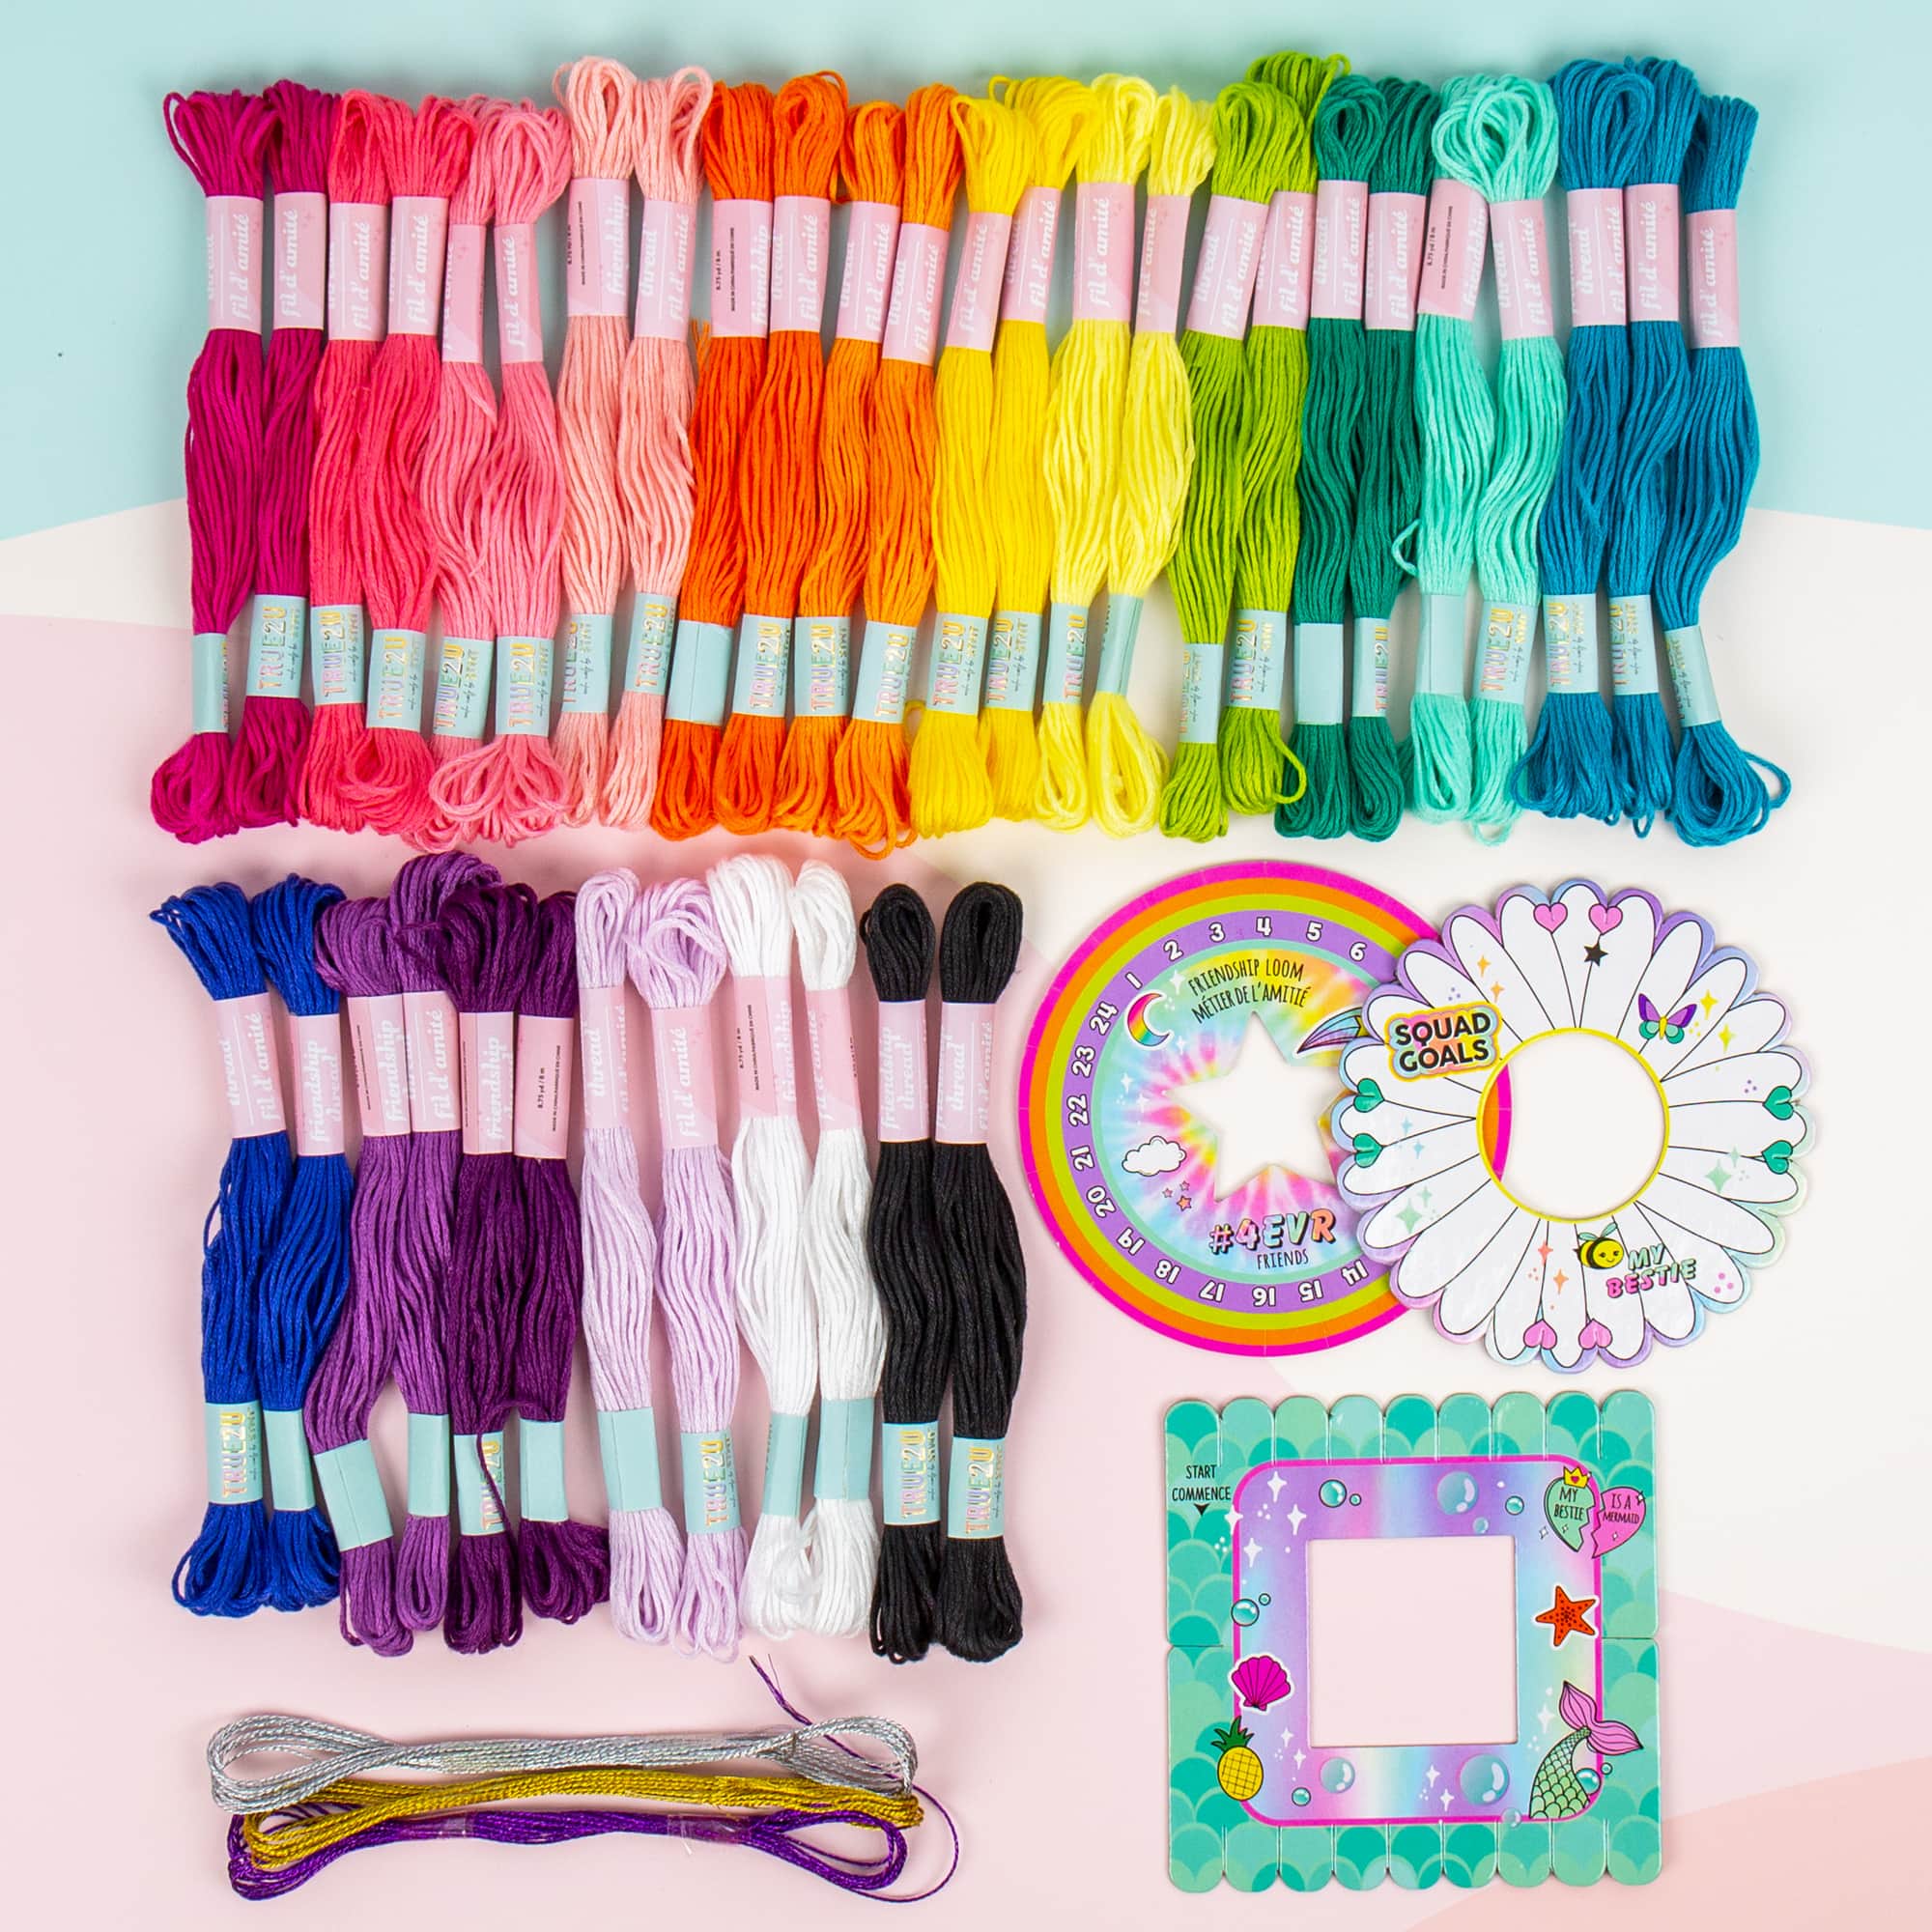 Friendship Bracelet Making Kit • Craft and crochet kits, gifts and